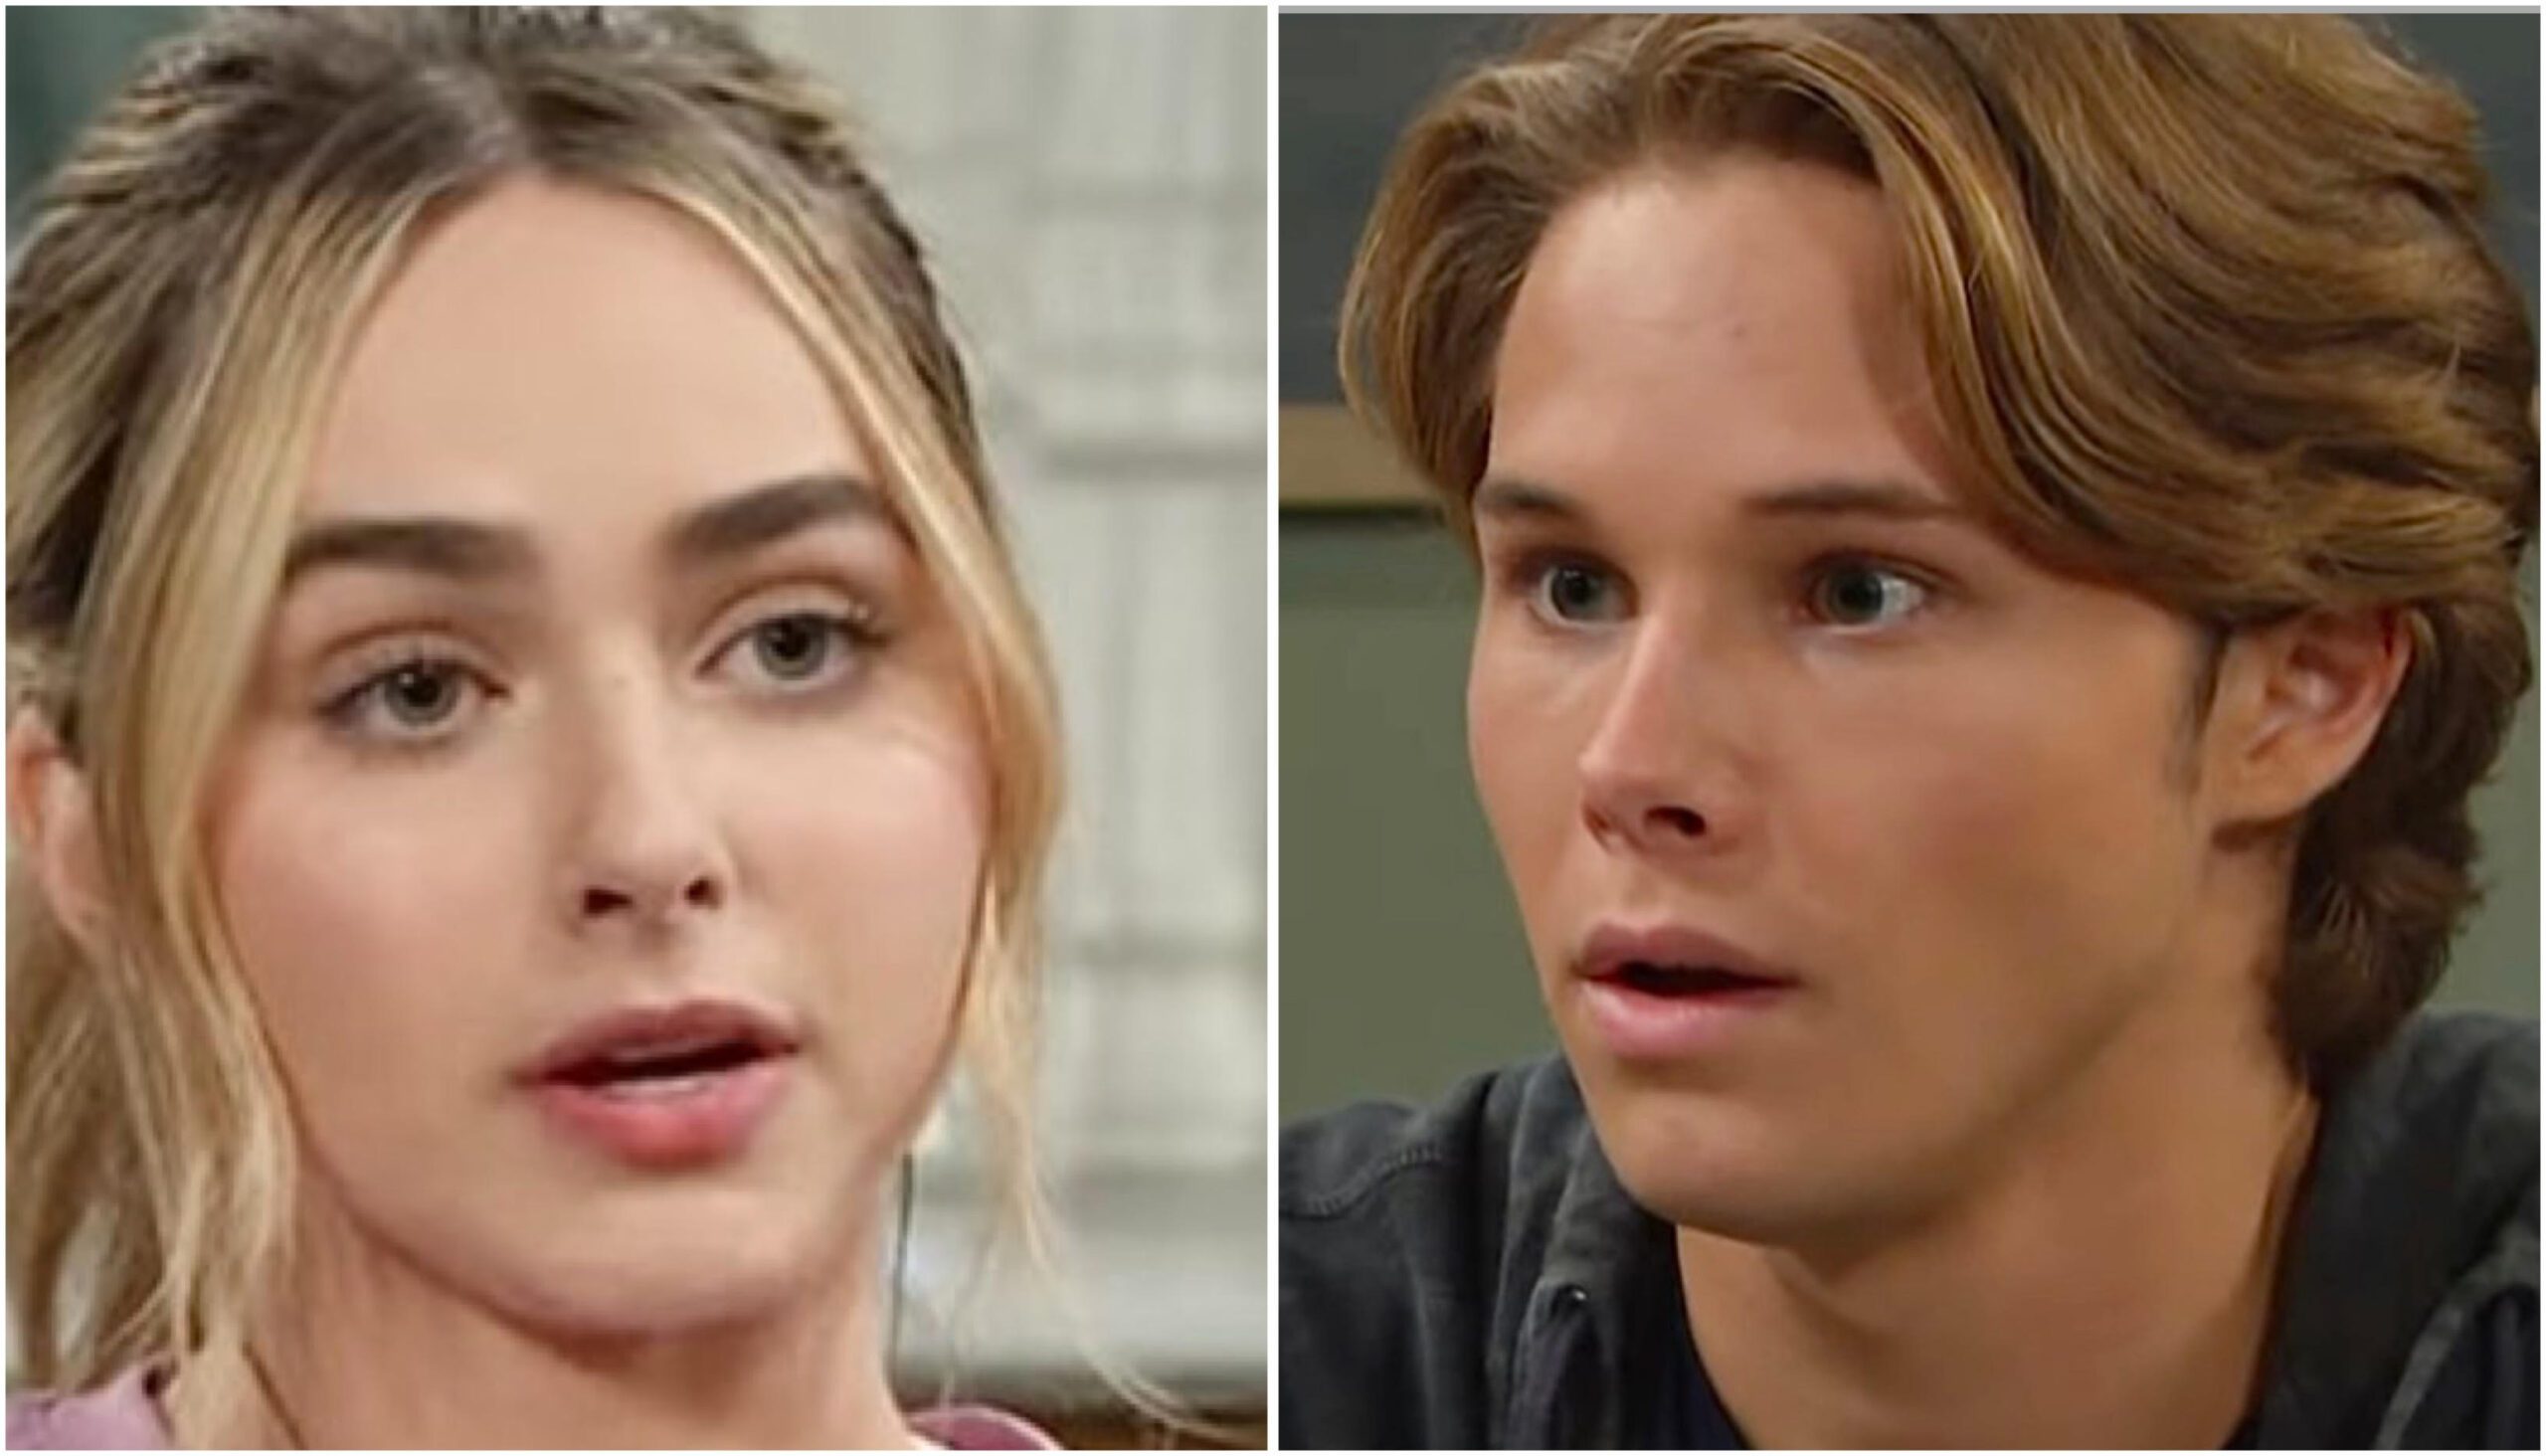 Days of Our Lives spoilers featuring Holly Jonas and Tate Black looking troubled